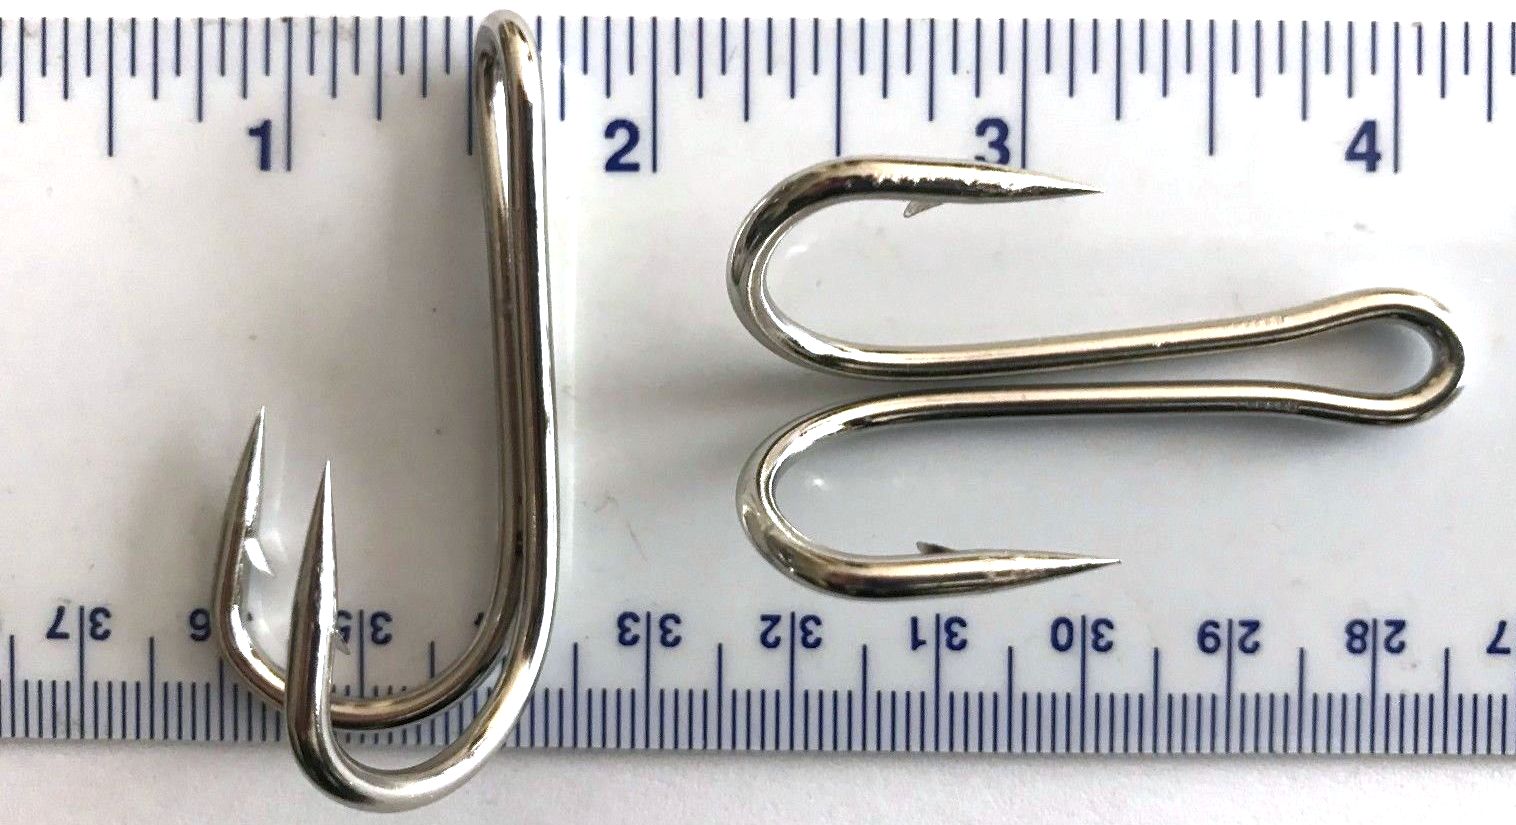 Gerry's Tackle (GT) Hooks – Gerry's Discount Tackle